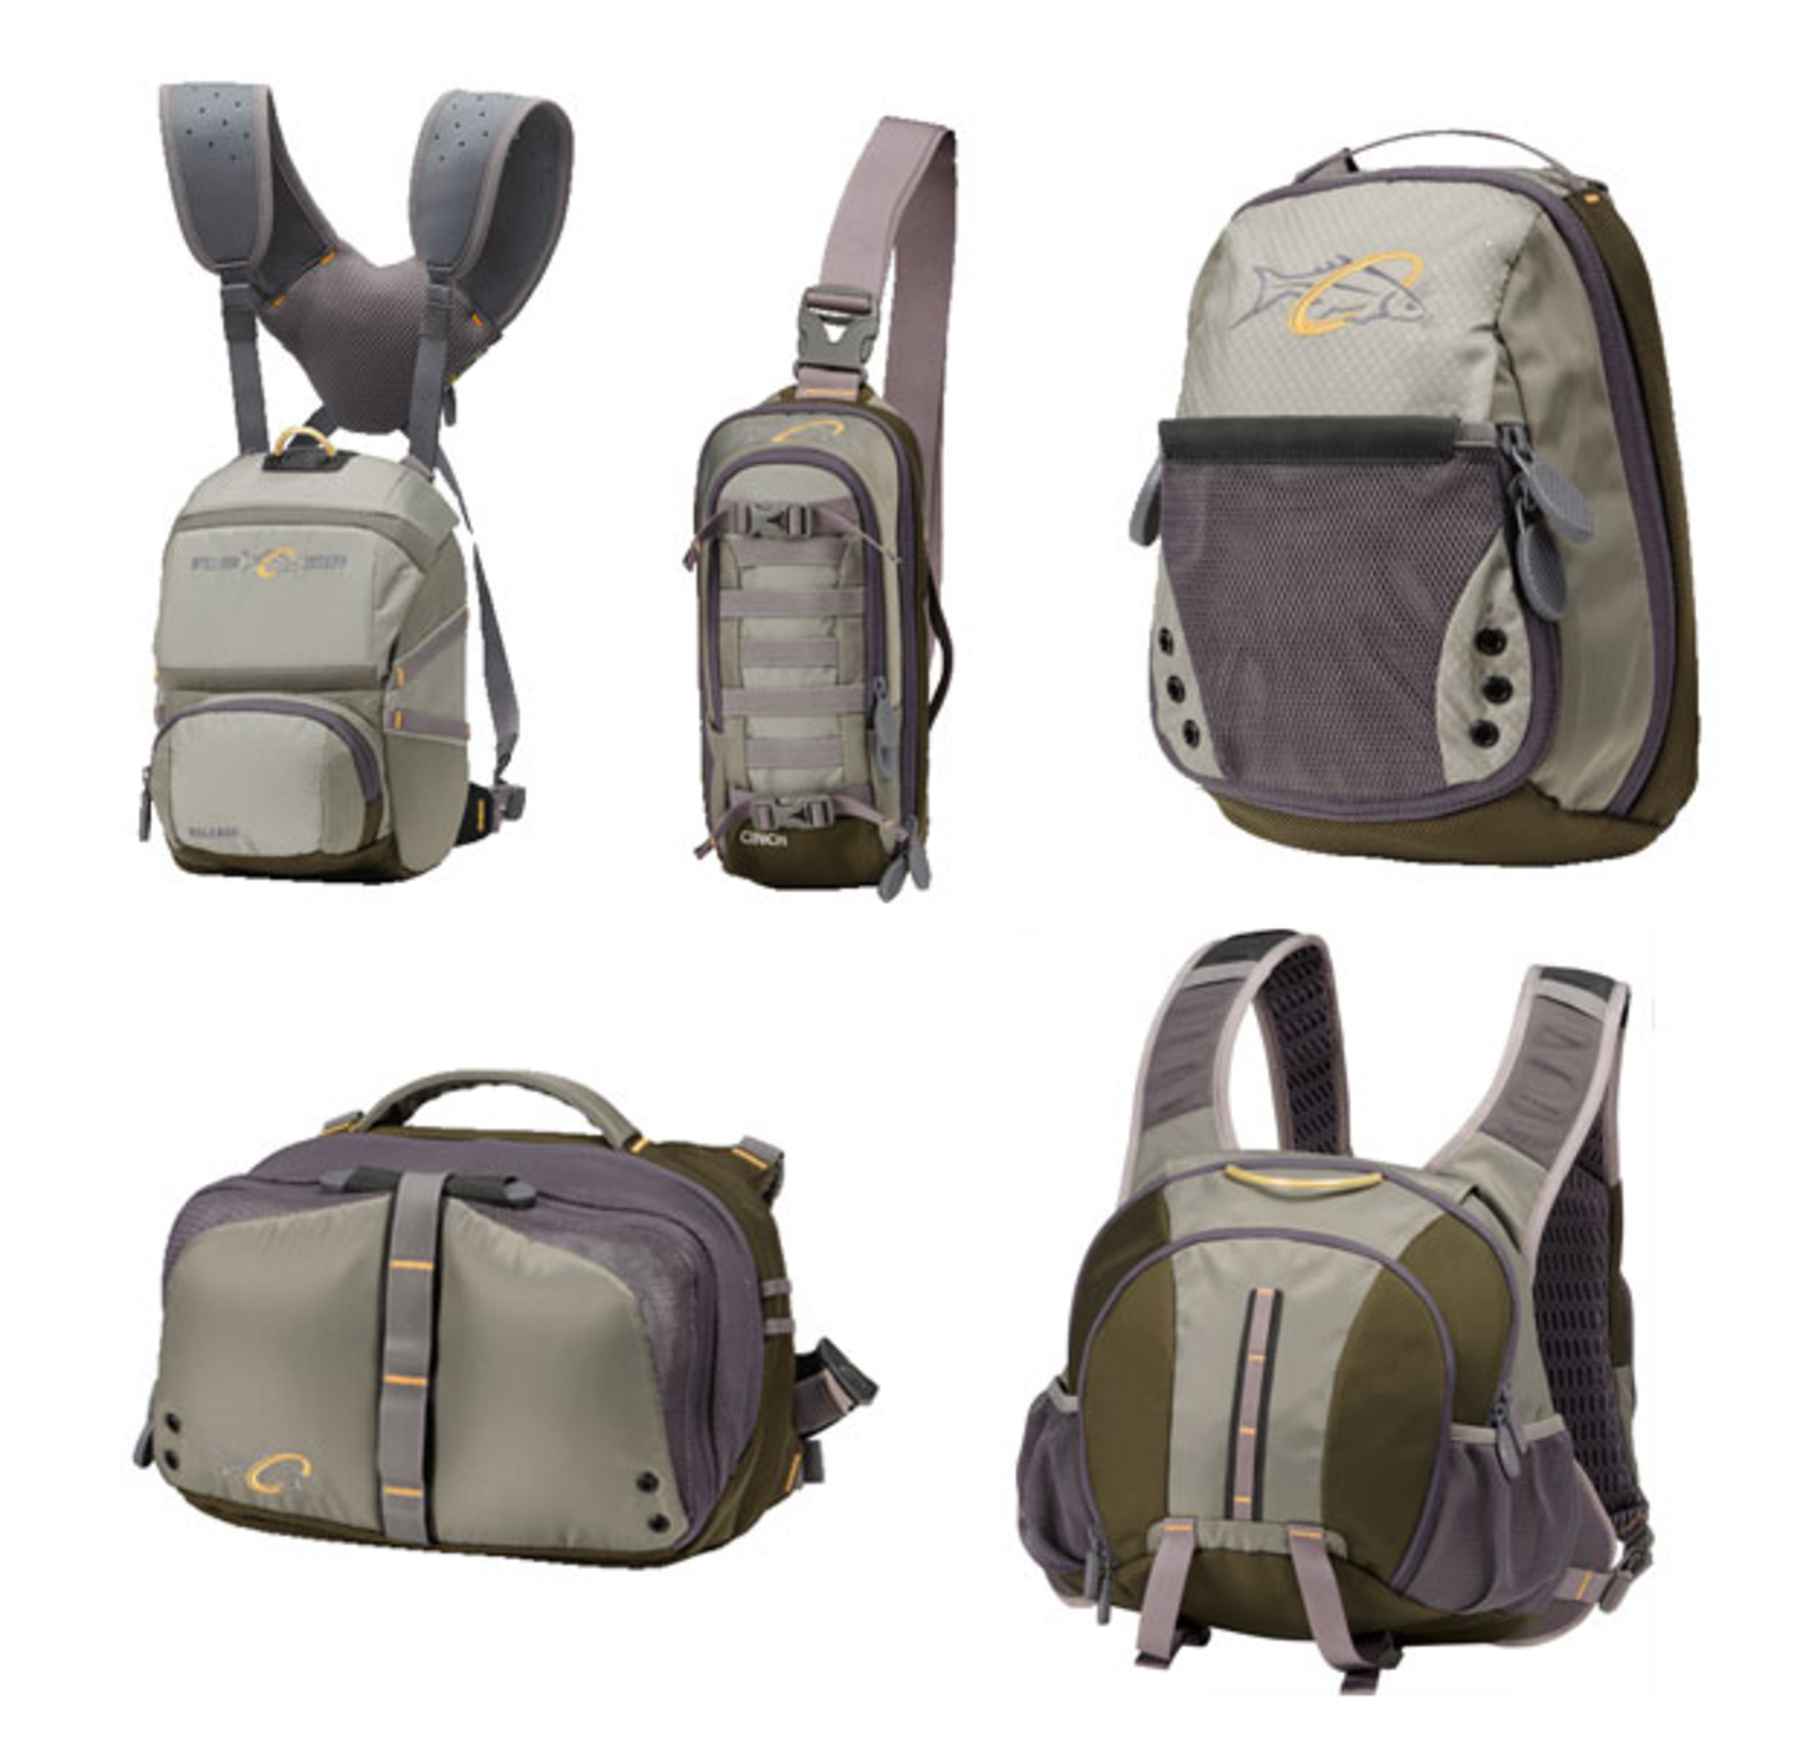 http://www.hatchmag.com/sites/default/files/styles/extra-large/public/field/image/wj-2014-packs.jpg